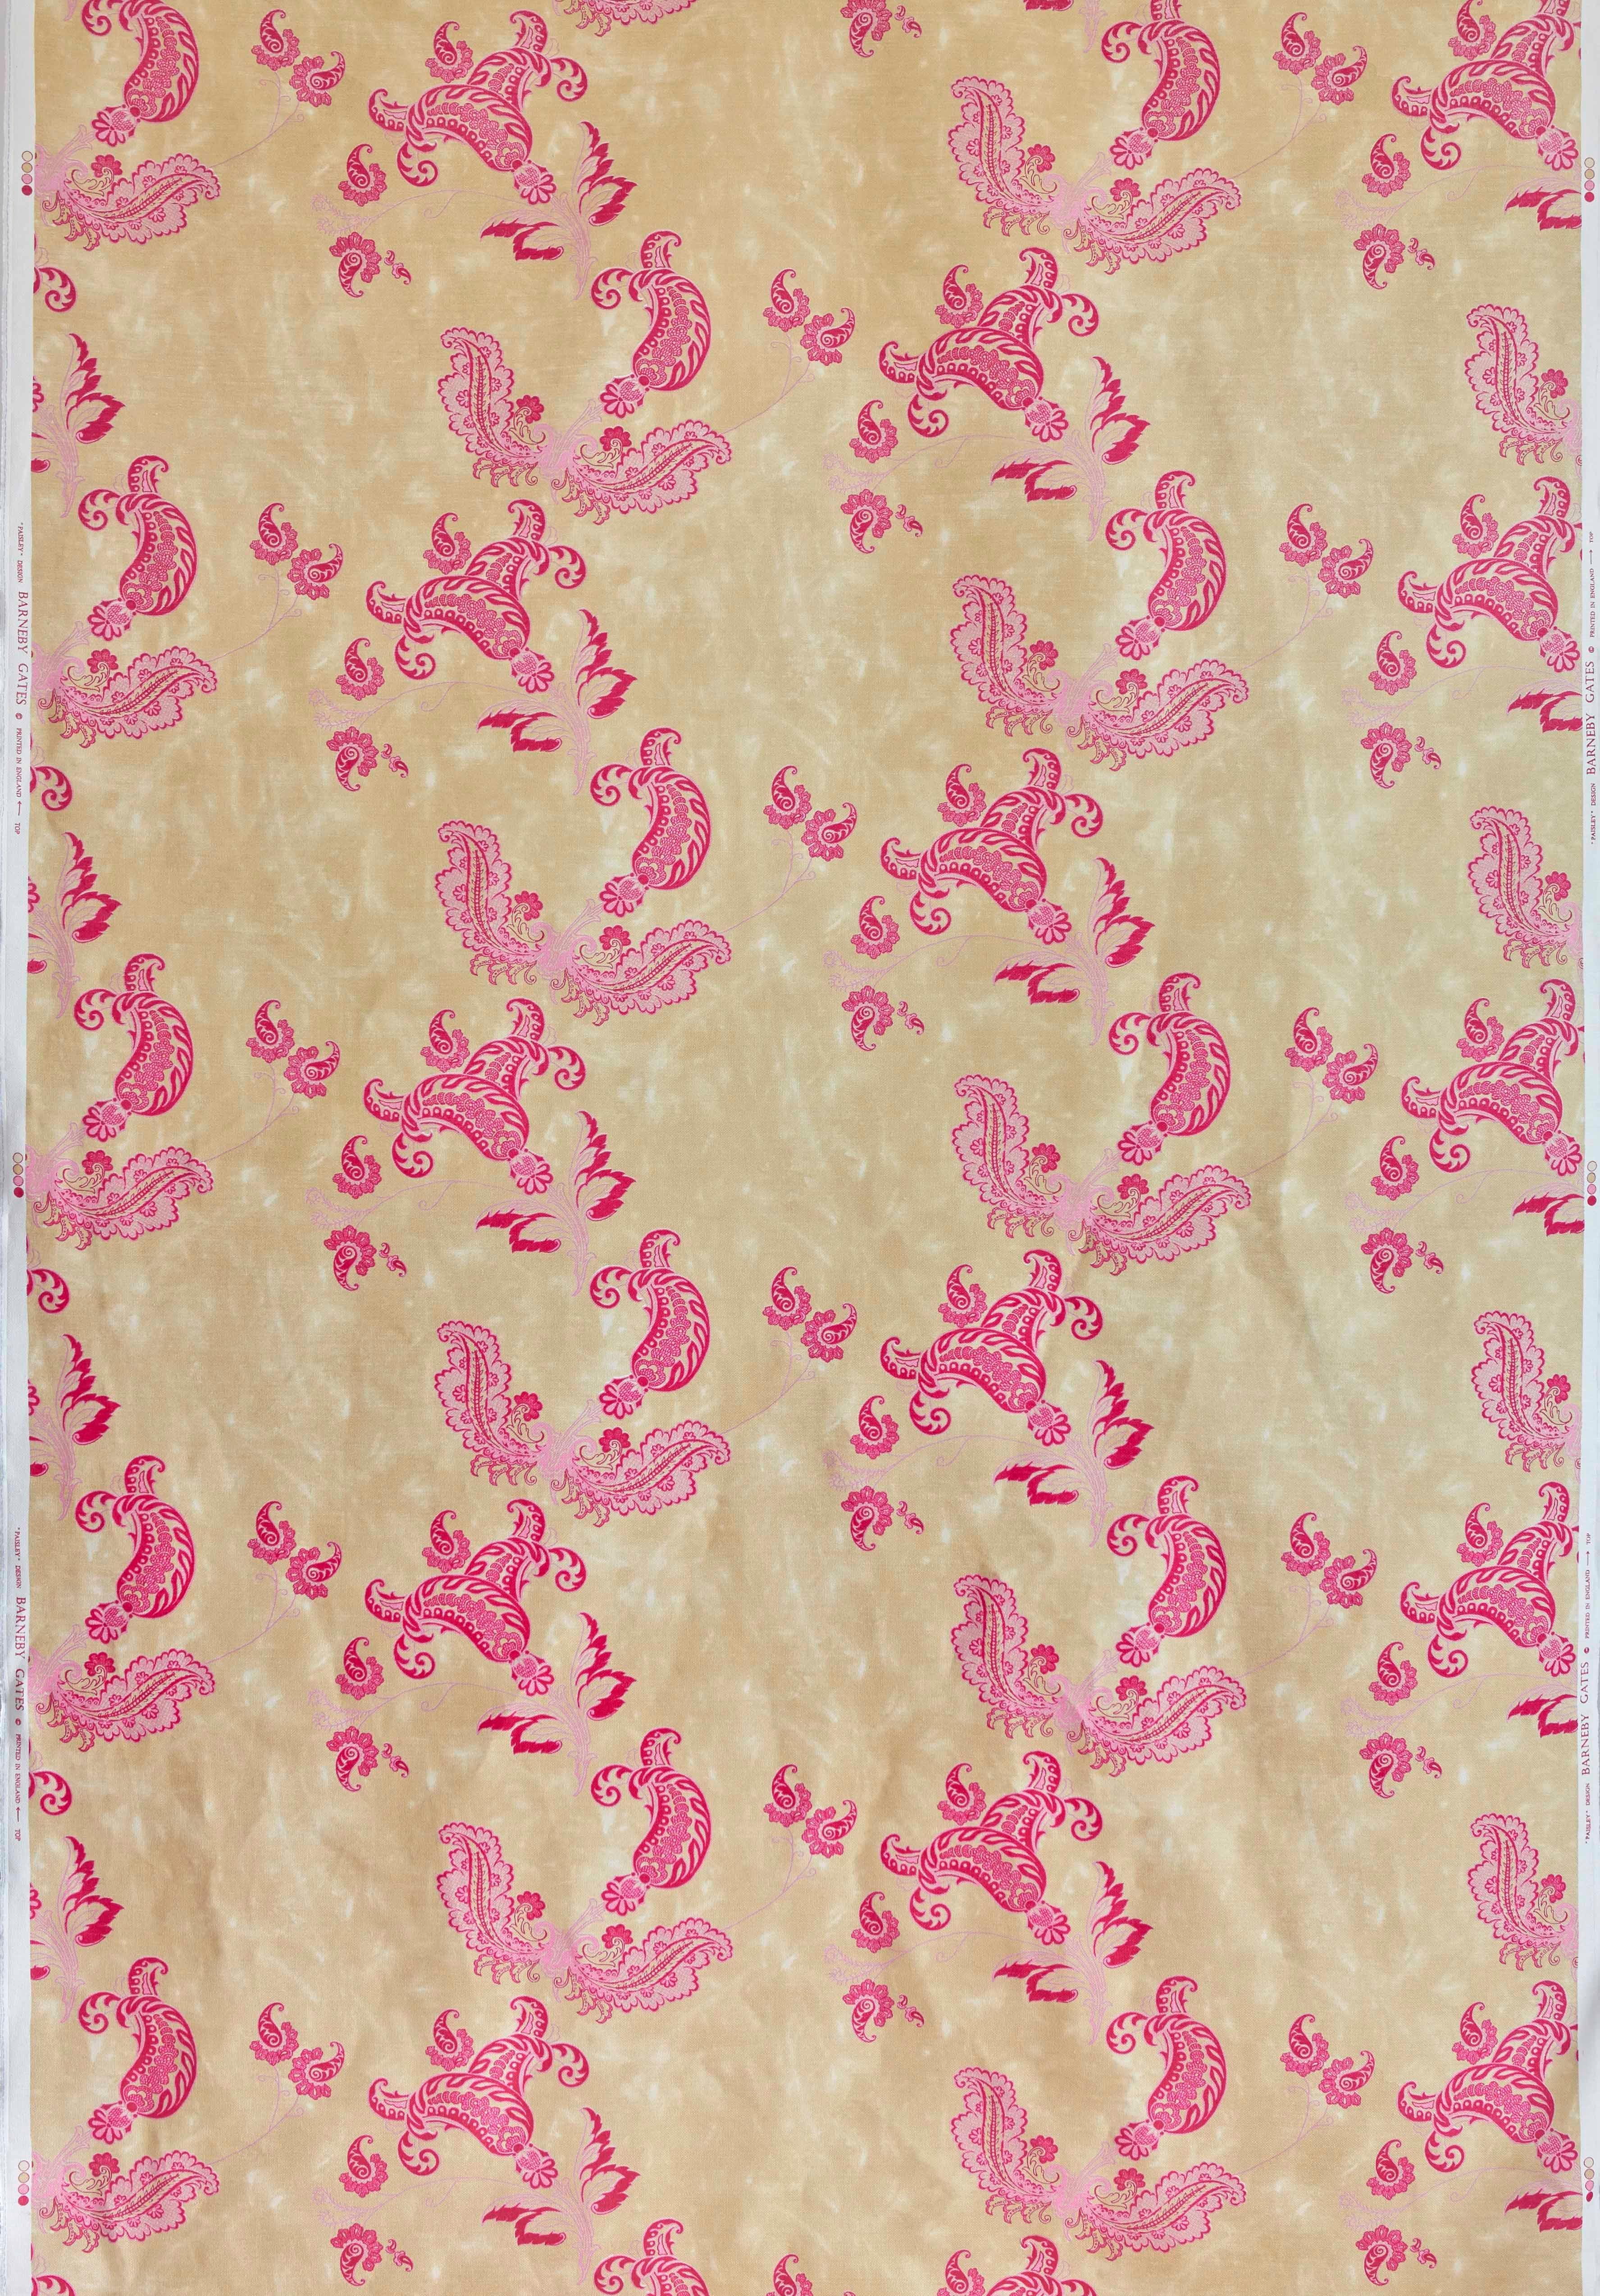 Colour: Hot pink on tea stain (also available in turquoise on old grey)
Trim width: 142cm / 55.90 inches
Pattern repeat: Half drop
Match length: 45.7cm / 18 inches
Composition: 53% linen 47% cotton
Usage: General domestic upholstery

Sold per